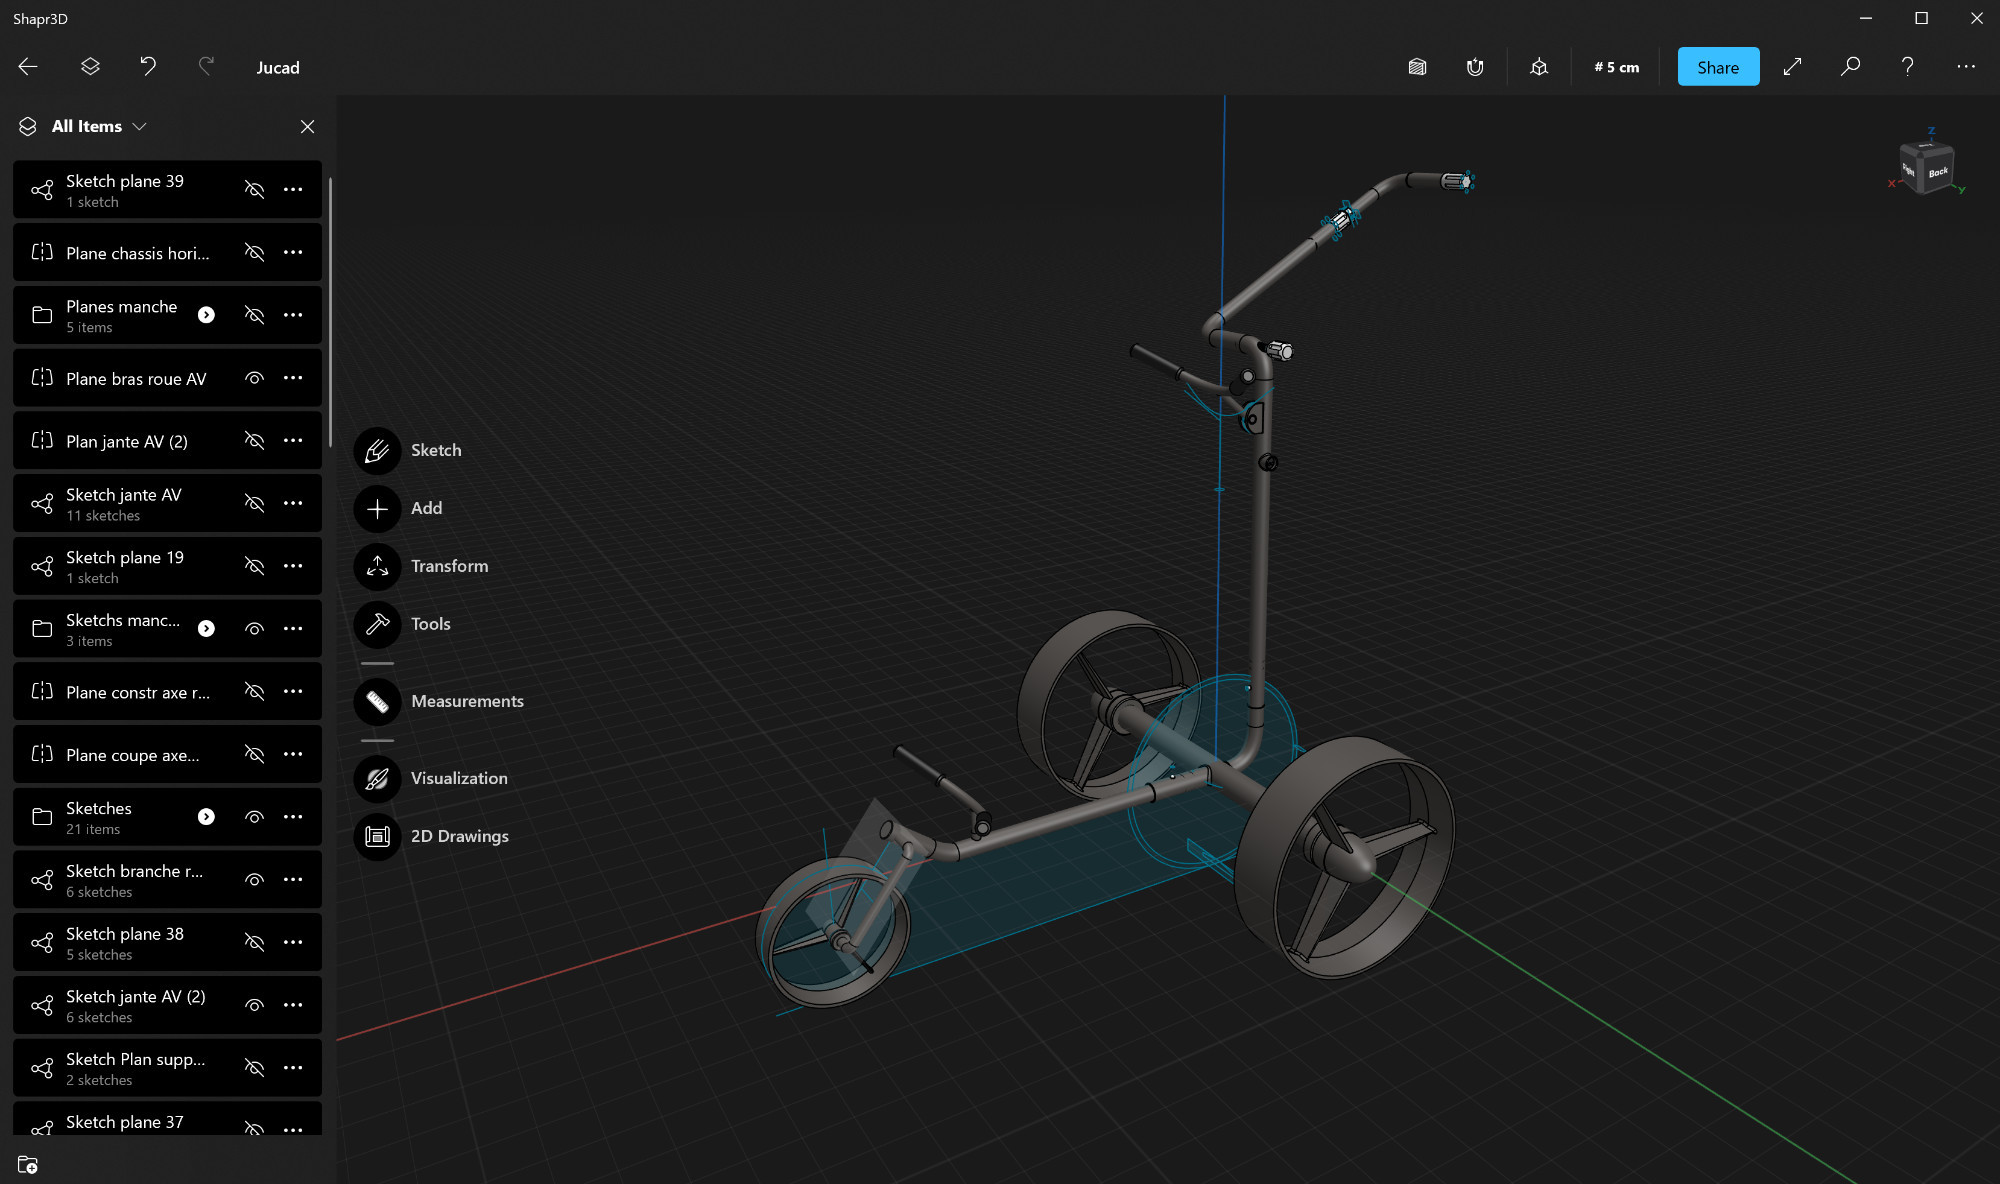 Shapr3D is now my go tool (together with Moi3D for some specific functions) for CAD modeling